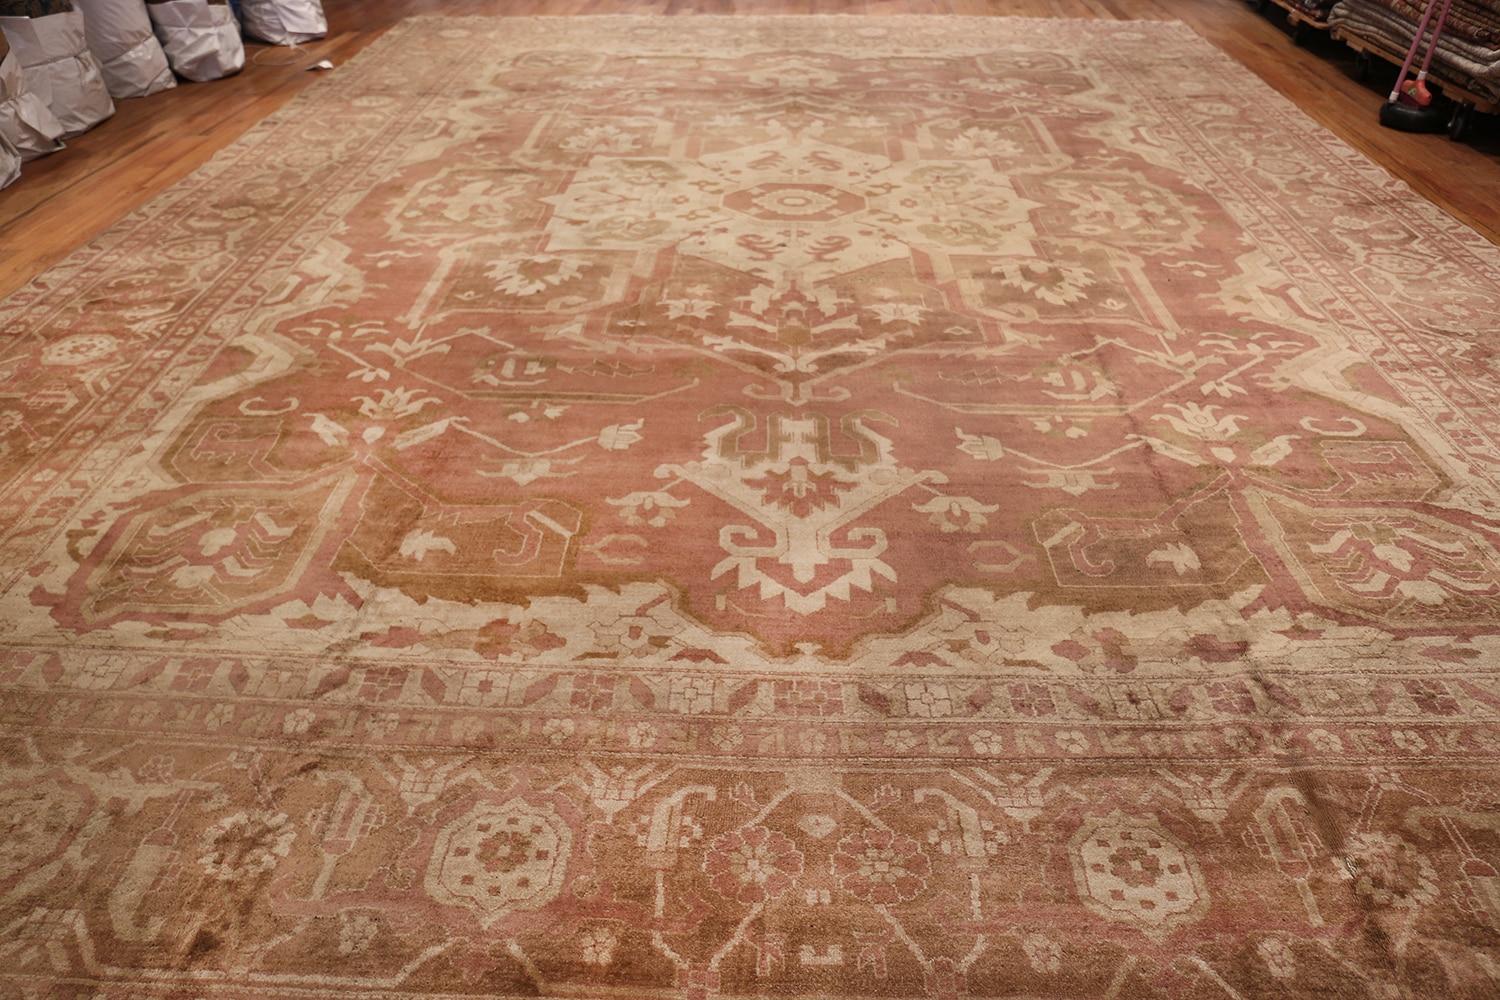 Large size antique Indian Amritsar rug, Country Of Origin: India, circa 1900 – Size: 14 ft 5 in x 18 ft 8 in (4.39 m x 5.69 m)

A large size classic Persian Heriz or Serapi rug design provides the point of departure for this elegant and reserved